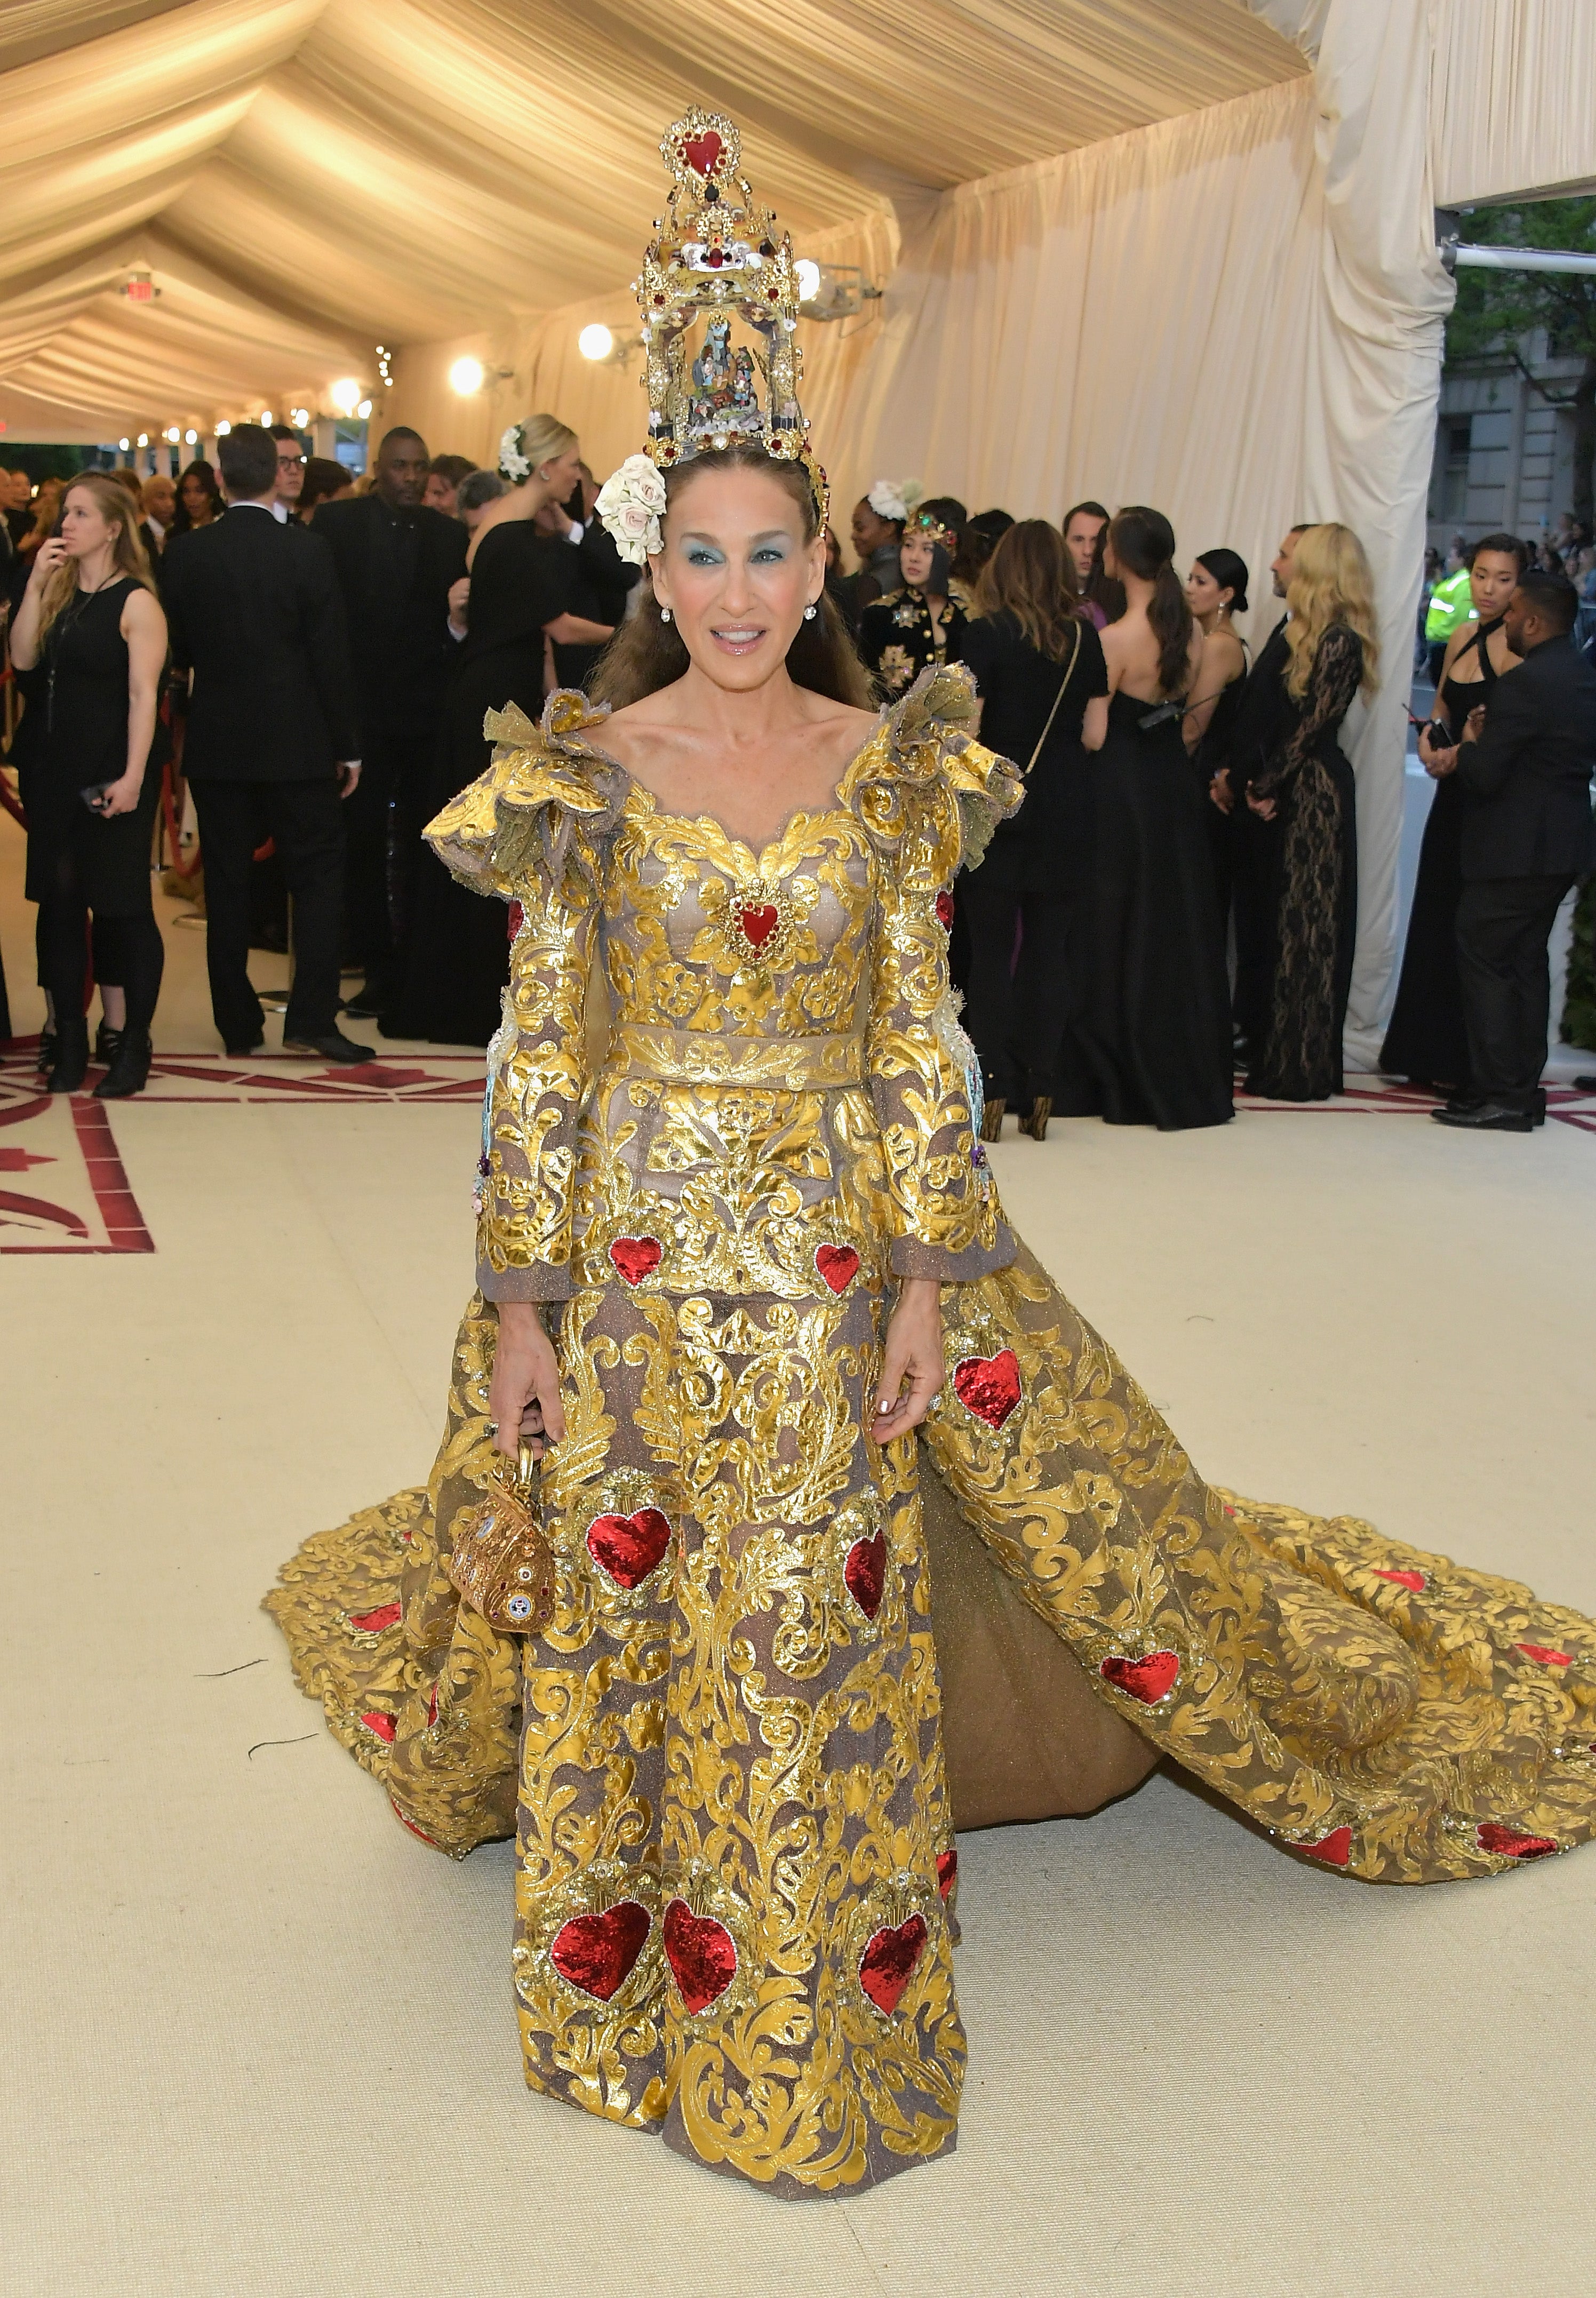 Sarah Jessica Parker Goes All Out at 2018 Met Gala -- See Her Epic Gown! |  Entertainment Tonight